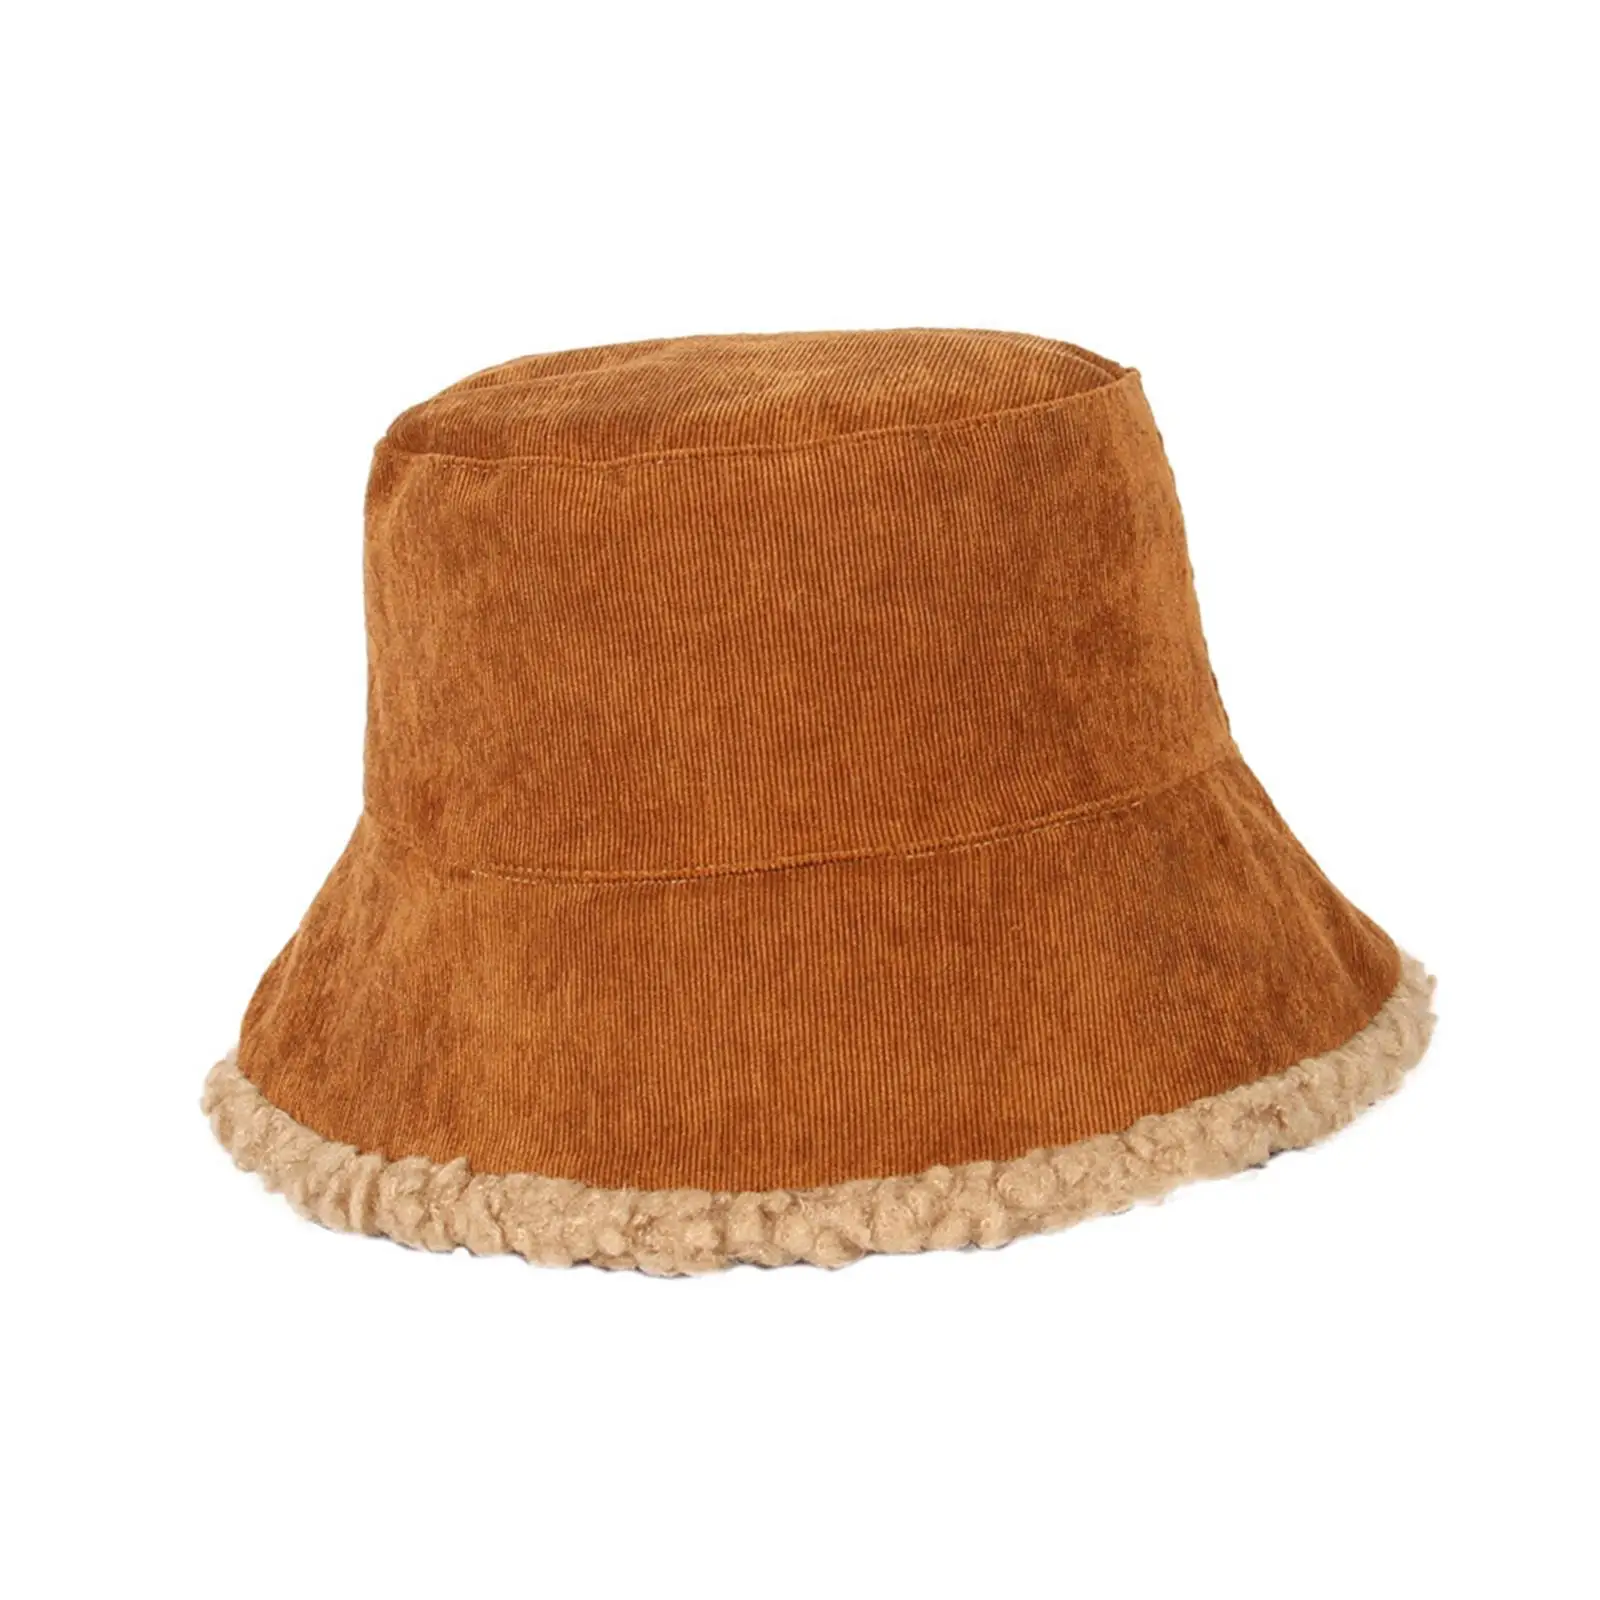 Trendy Bucket Hat Fisherman Caps Comfortable Furry Versatile Autumn Winter Hat for Backpacking Camping Picnic Travel Street